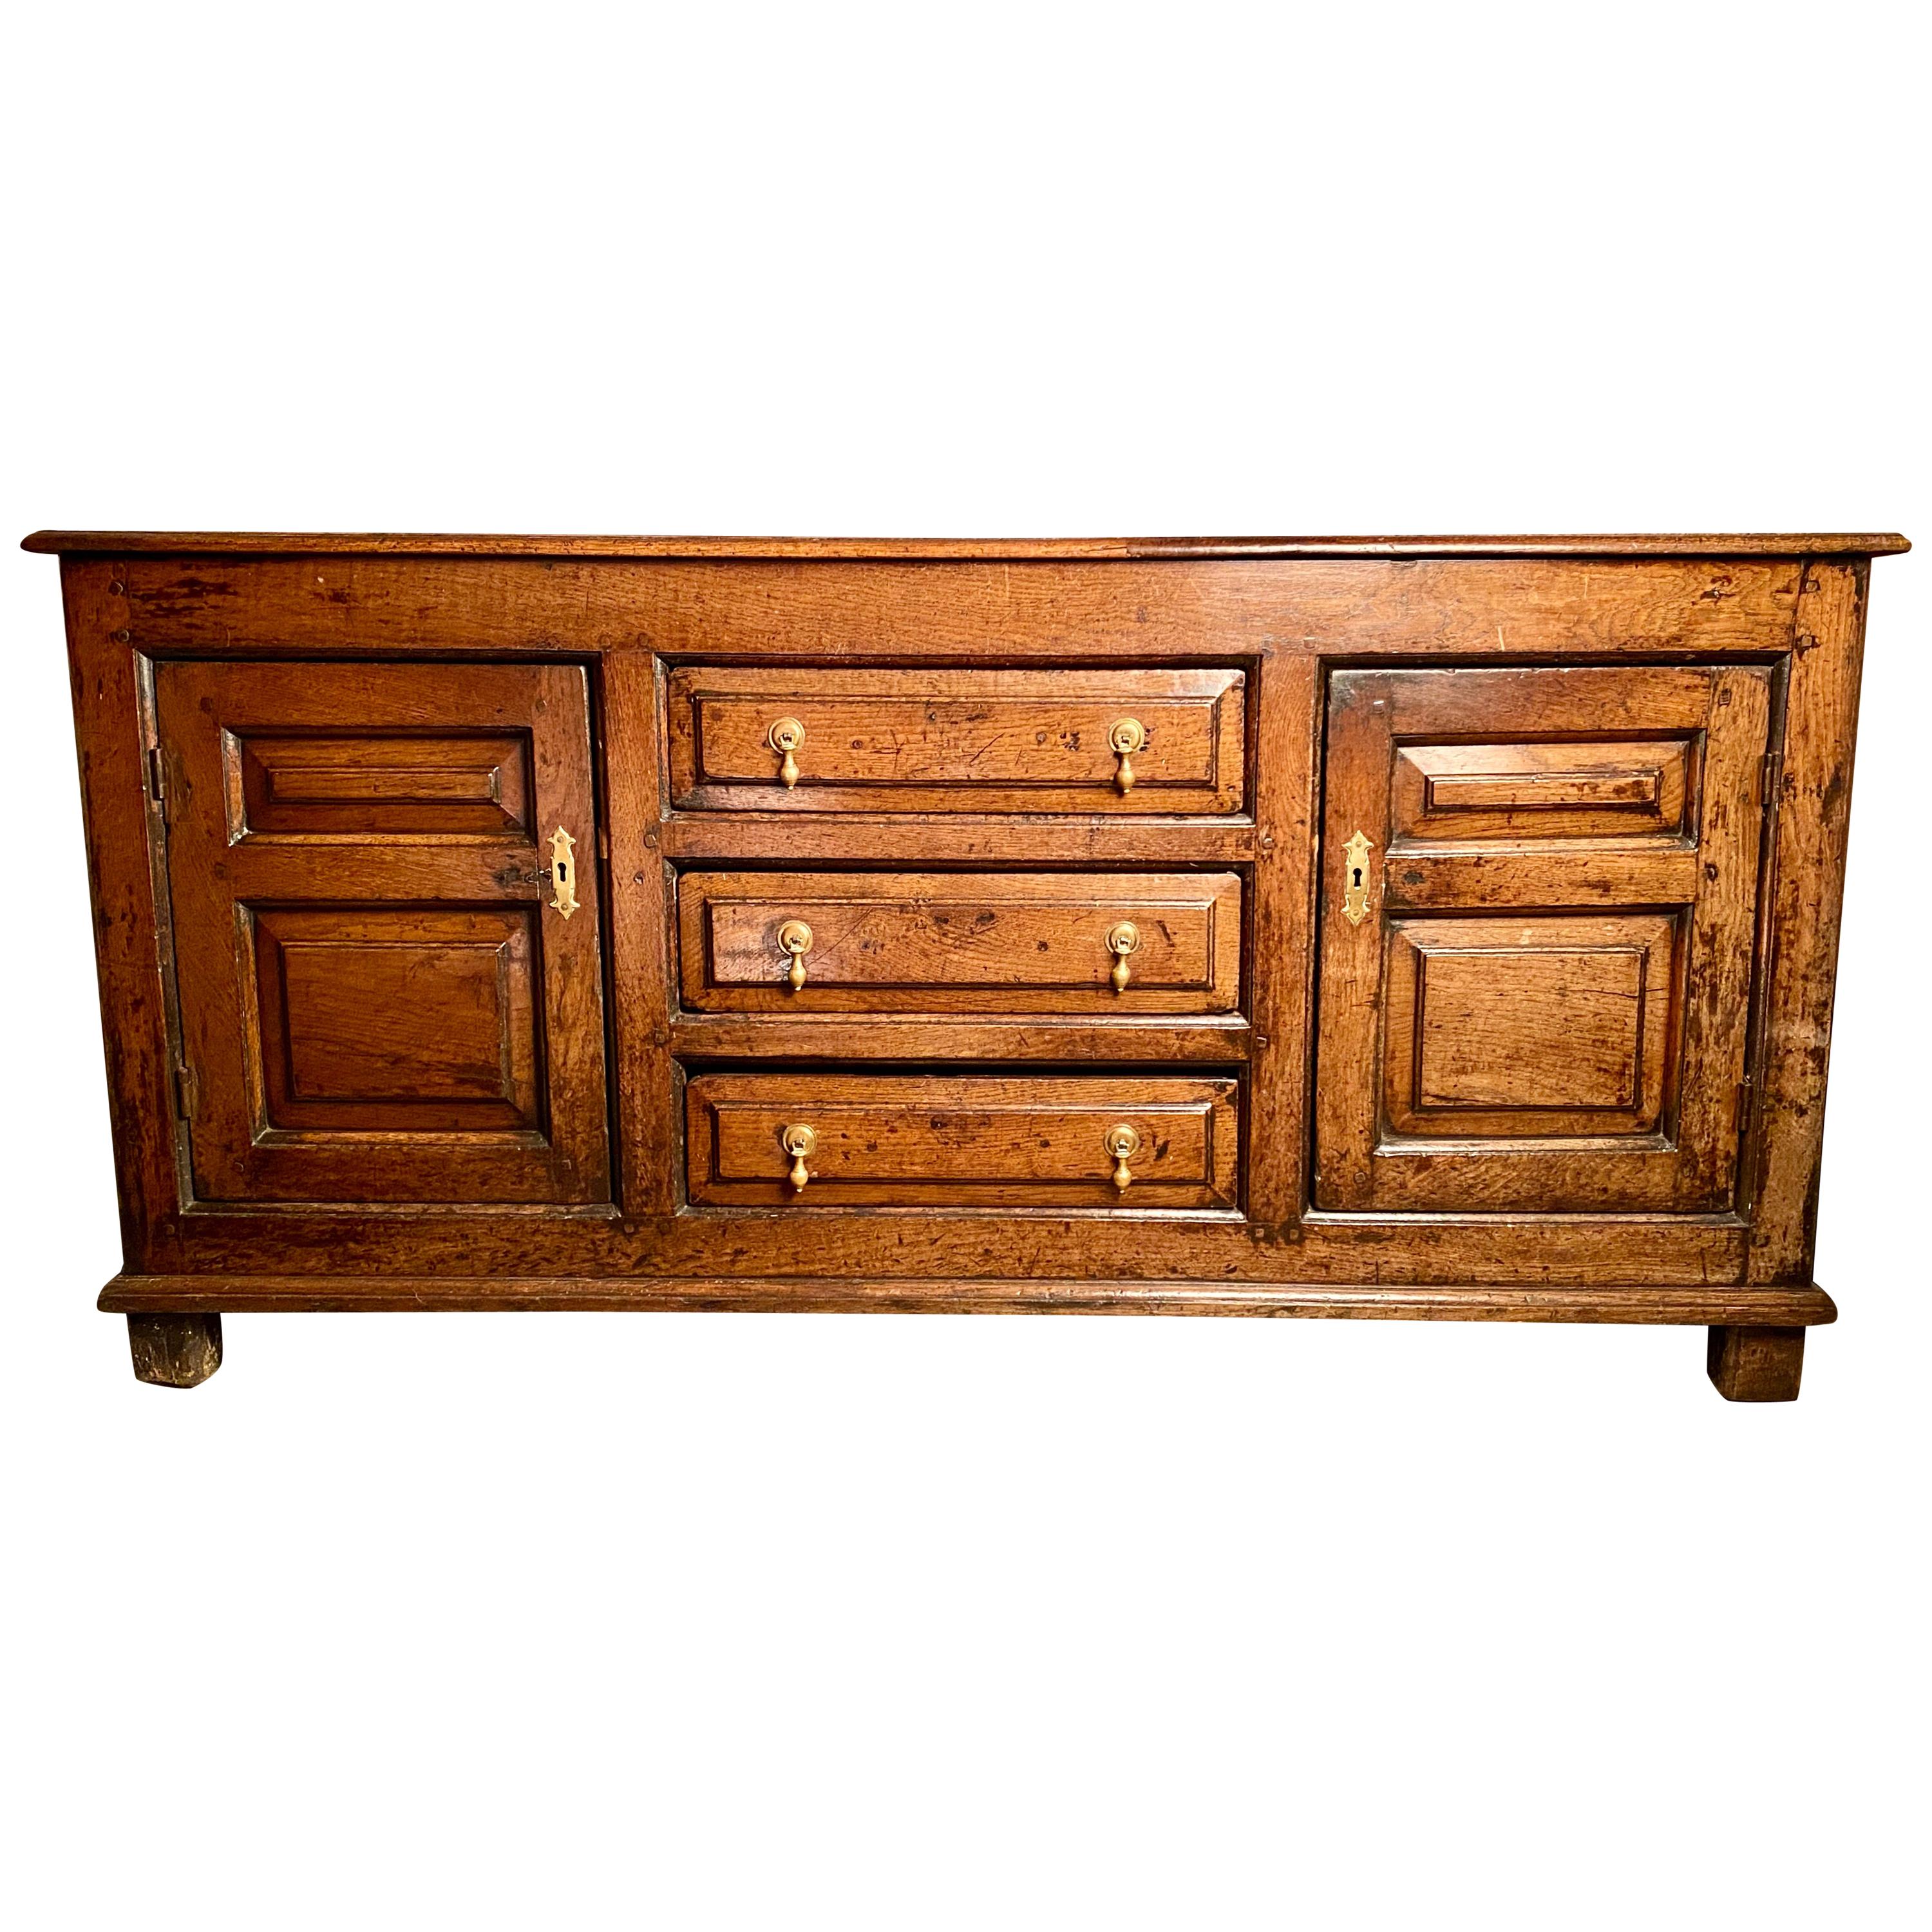 Small 18th Century Oak Welsh Dresser with Rack